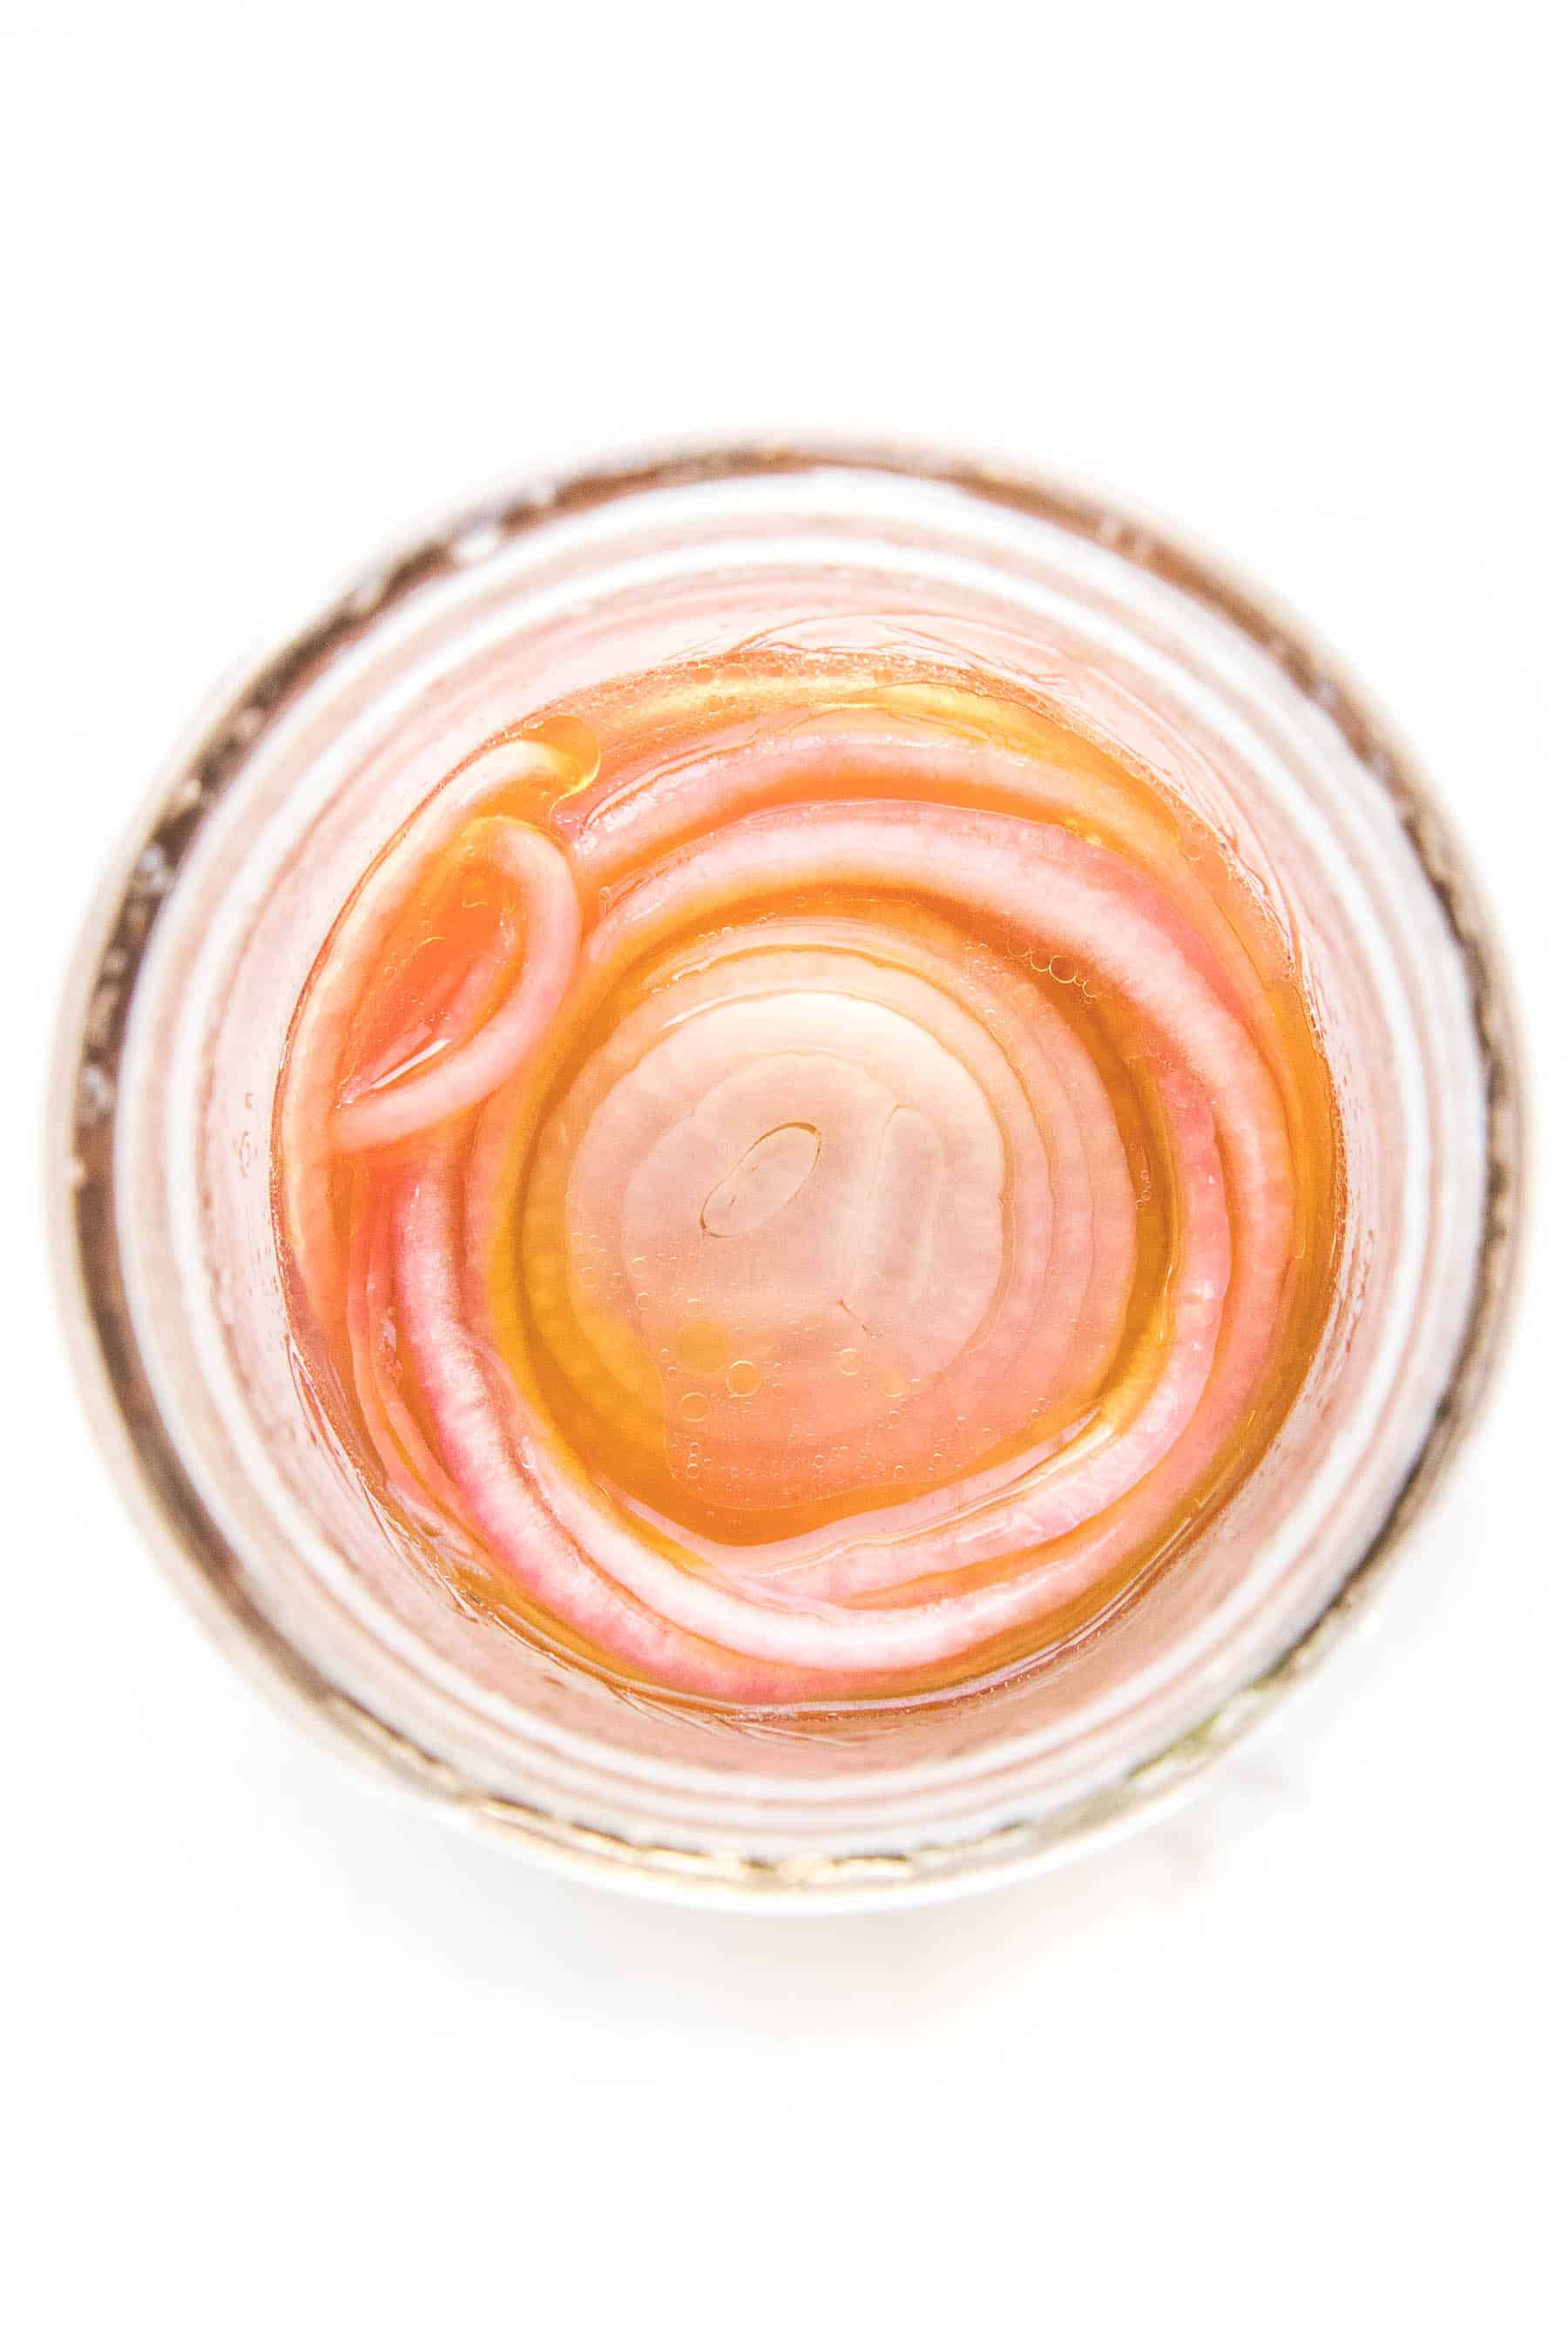 pickled onions in a mason jar on a white background